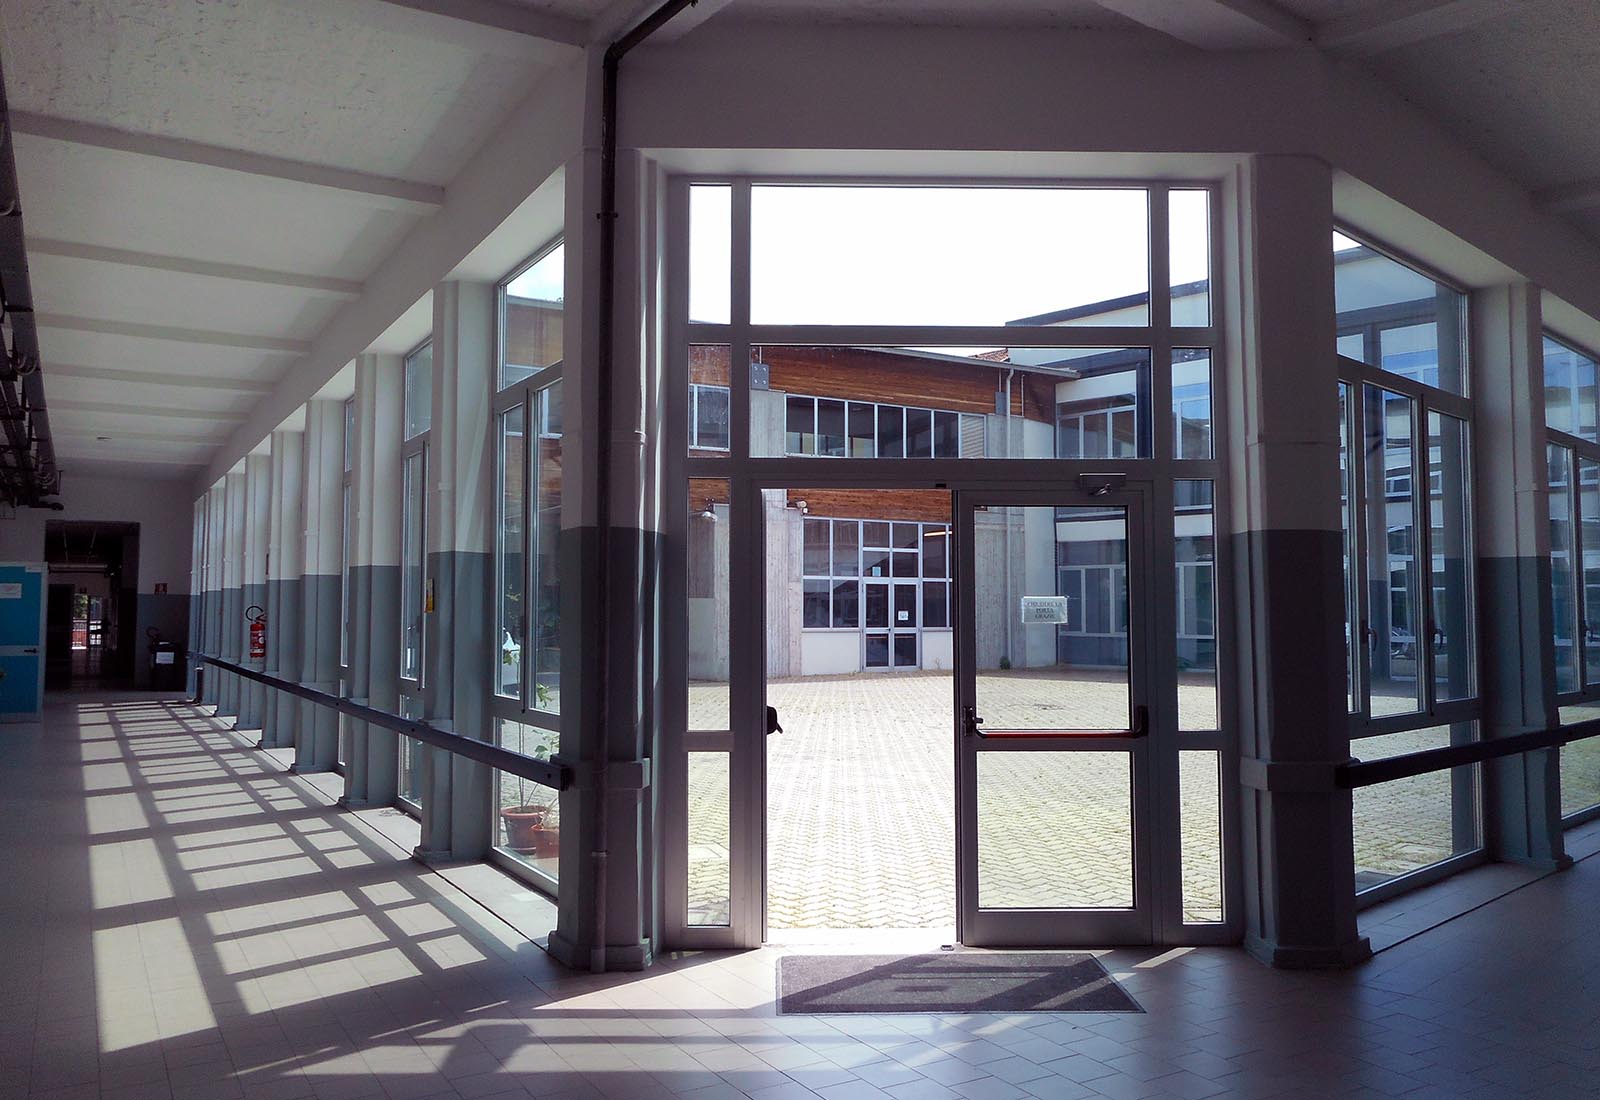 High school renovation in Melegnano - View of the courtyard